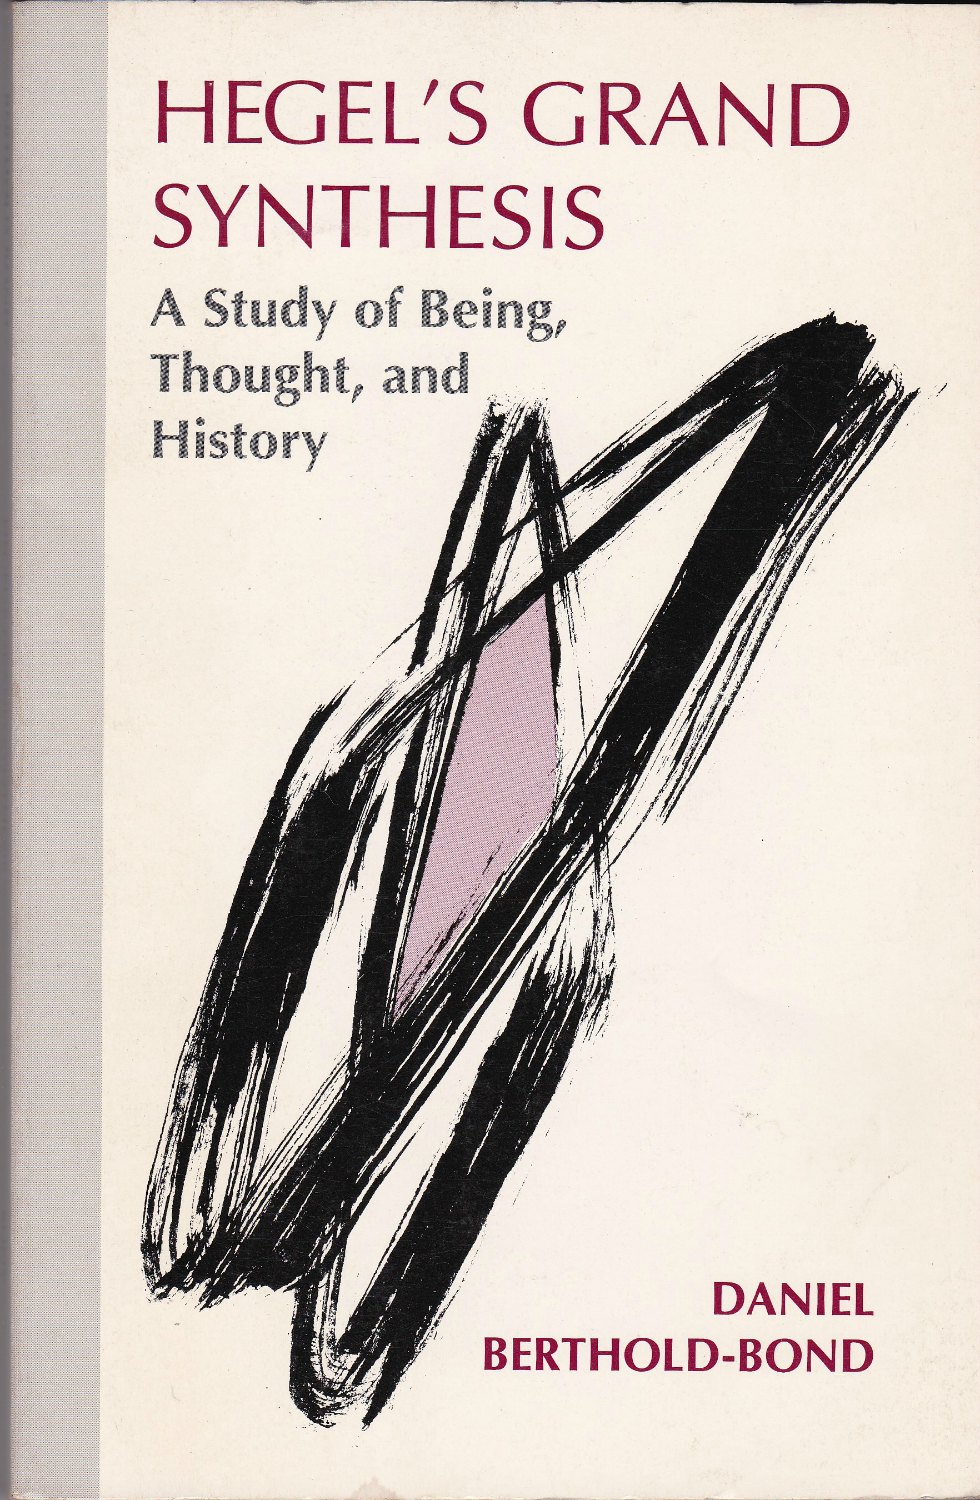 Hegel's grand synthesis : a study of being, thought, and history.